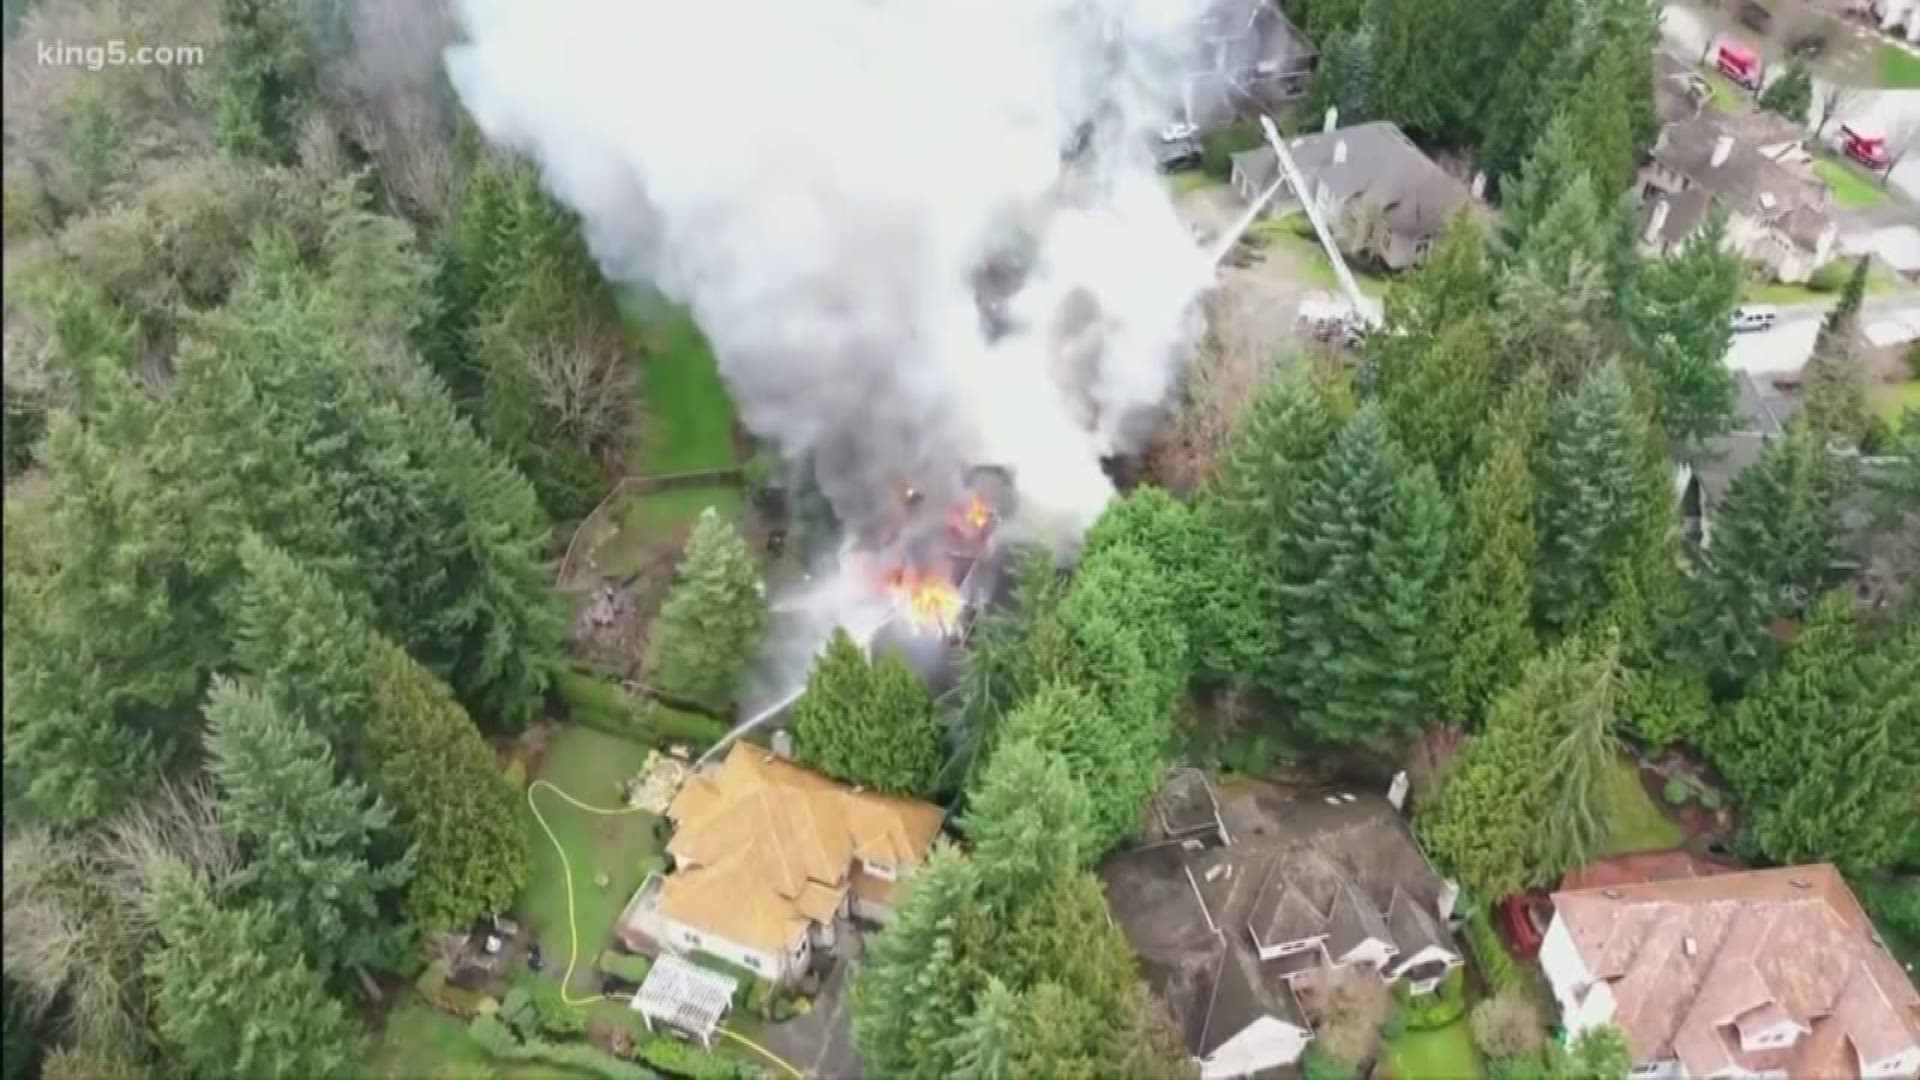 Two children, a woman and a man are safe after a hostage situation that led to a house fire in Issaquah's Montreux neighborhood last night.